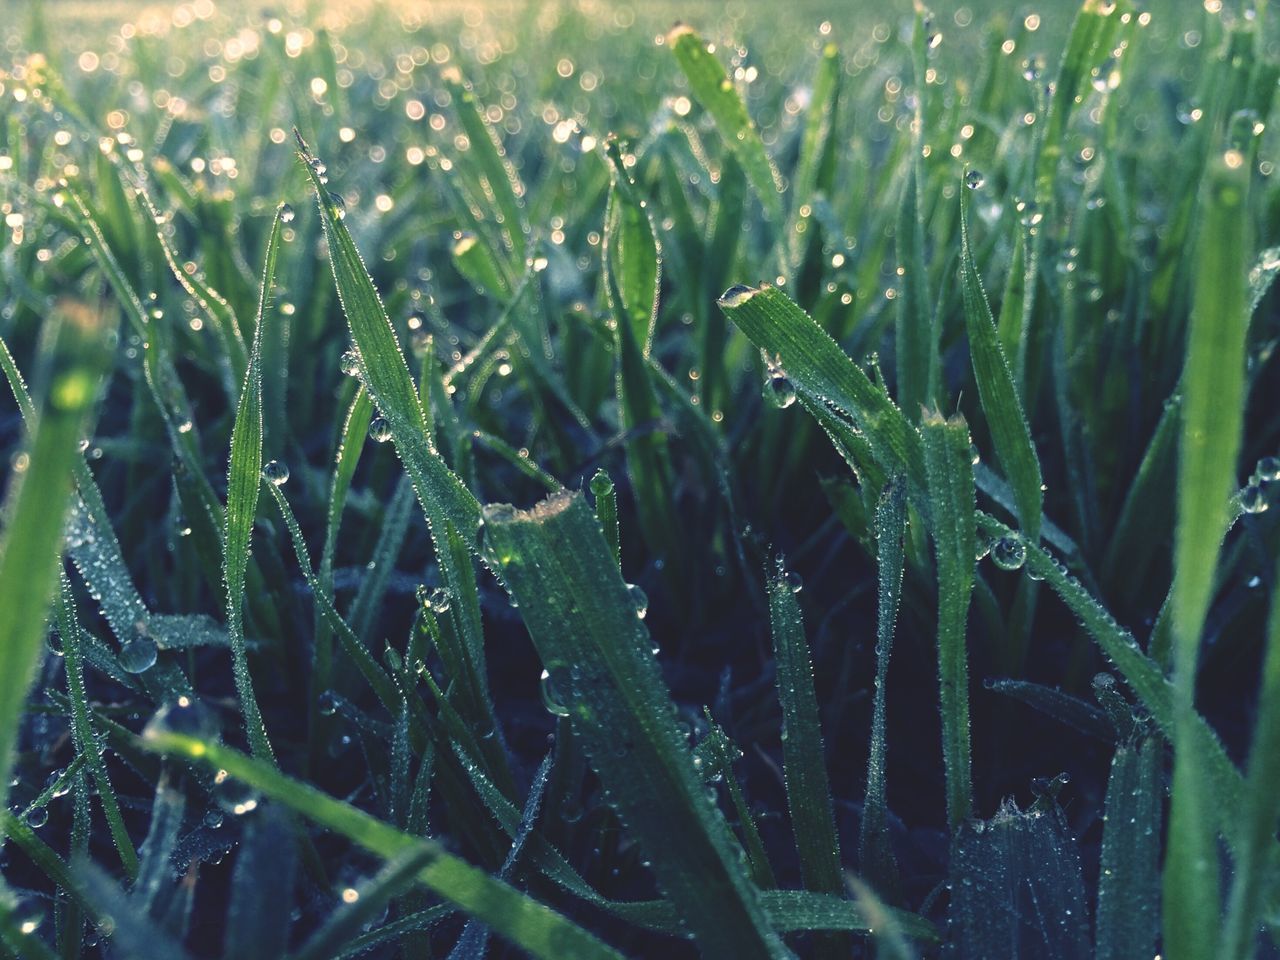 drop, water, wet, growth, dew, close-up, freshness, nature, grass, beauty in nature, plant, blade of grass, green color, fragility, full frame, focus on foreground, raindrop, field, backgrounds, rain